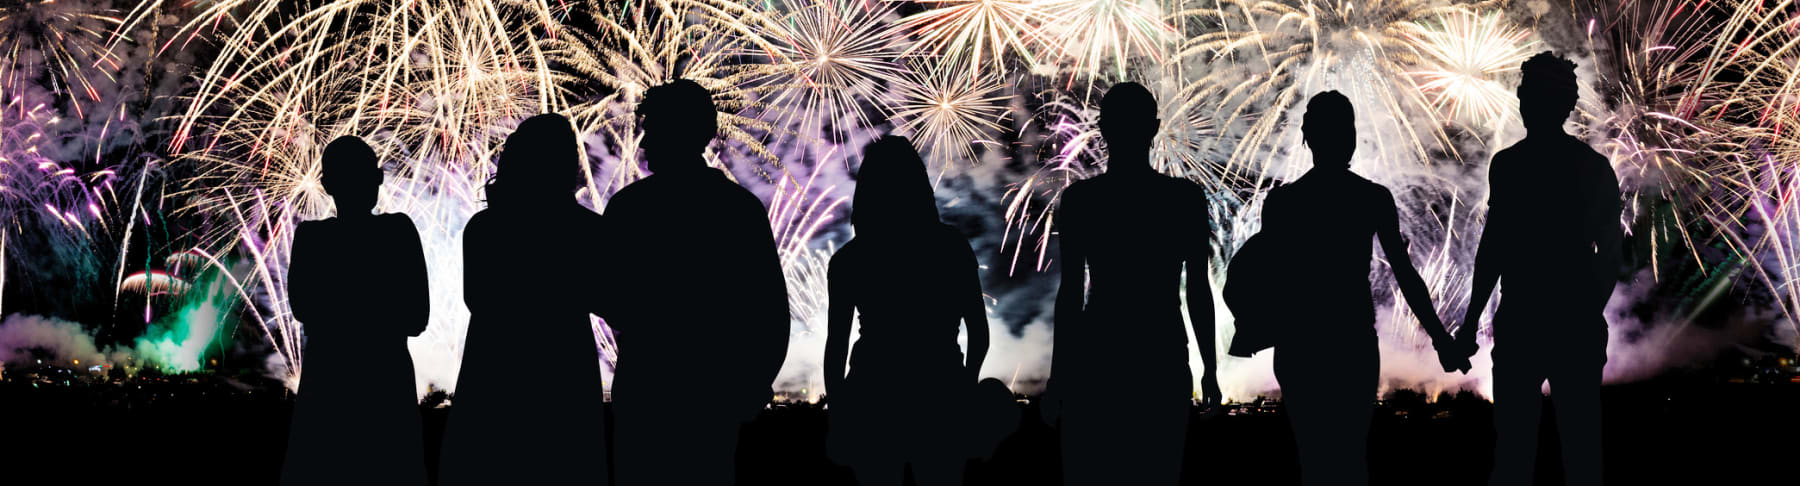 silhouettes in fireworks